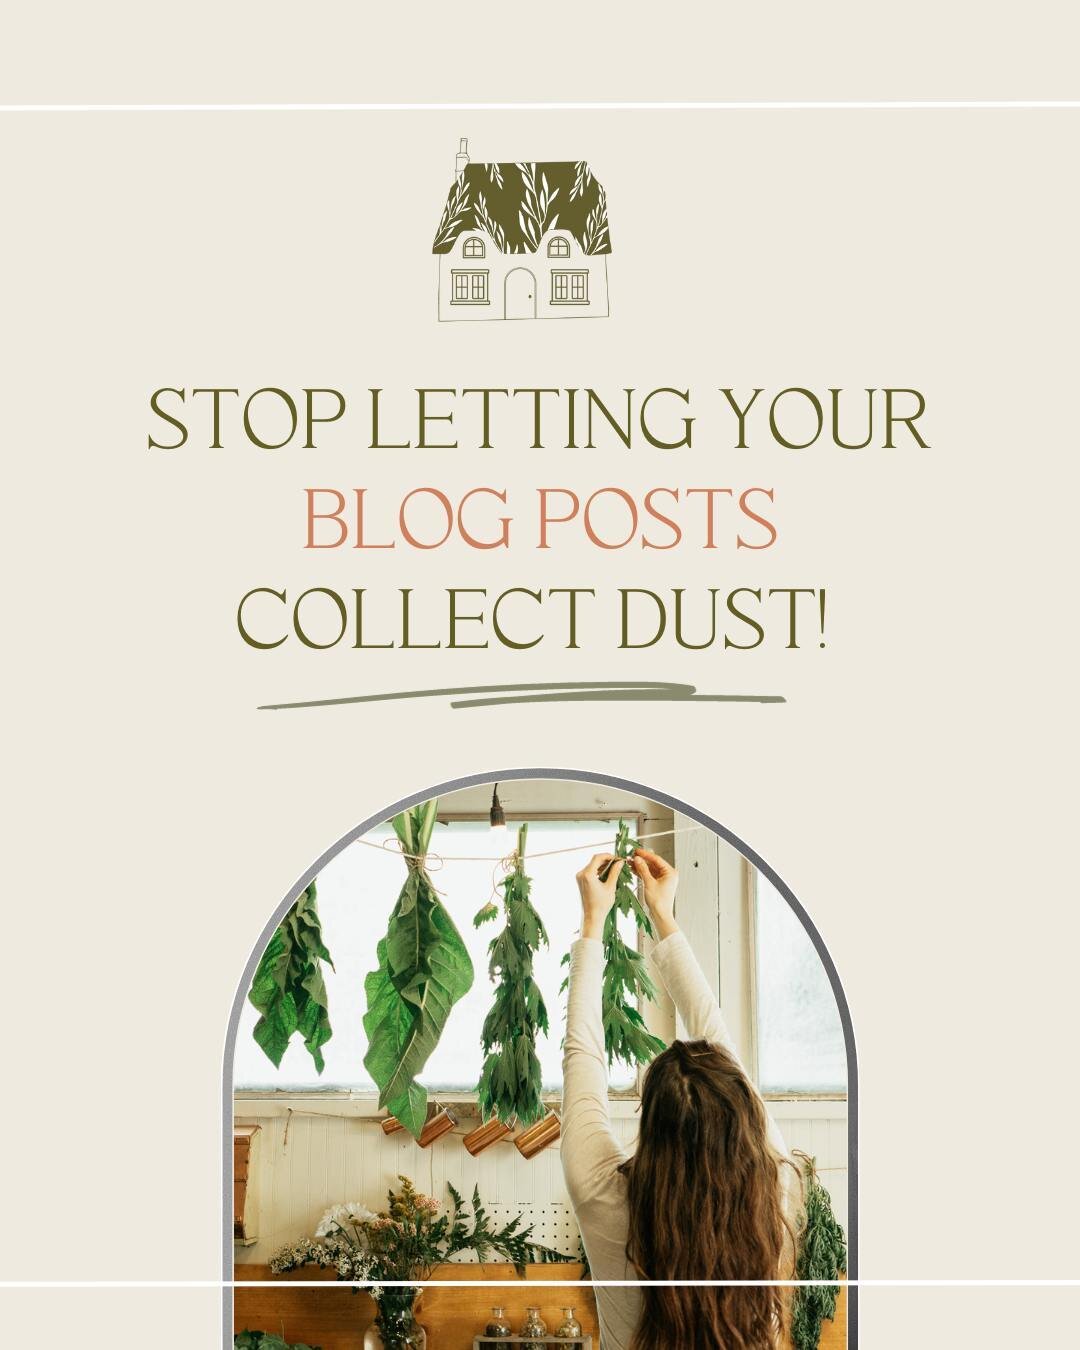 Stop letting your blog posts collect dust!⁣
⁣
You&rsquo;ve invested way too much time and energy into your blog posts to let them wallow around, forgotten on your website. Here are 3 ways to keep those blog posts working long after you hit &ldquo;pub